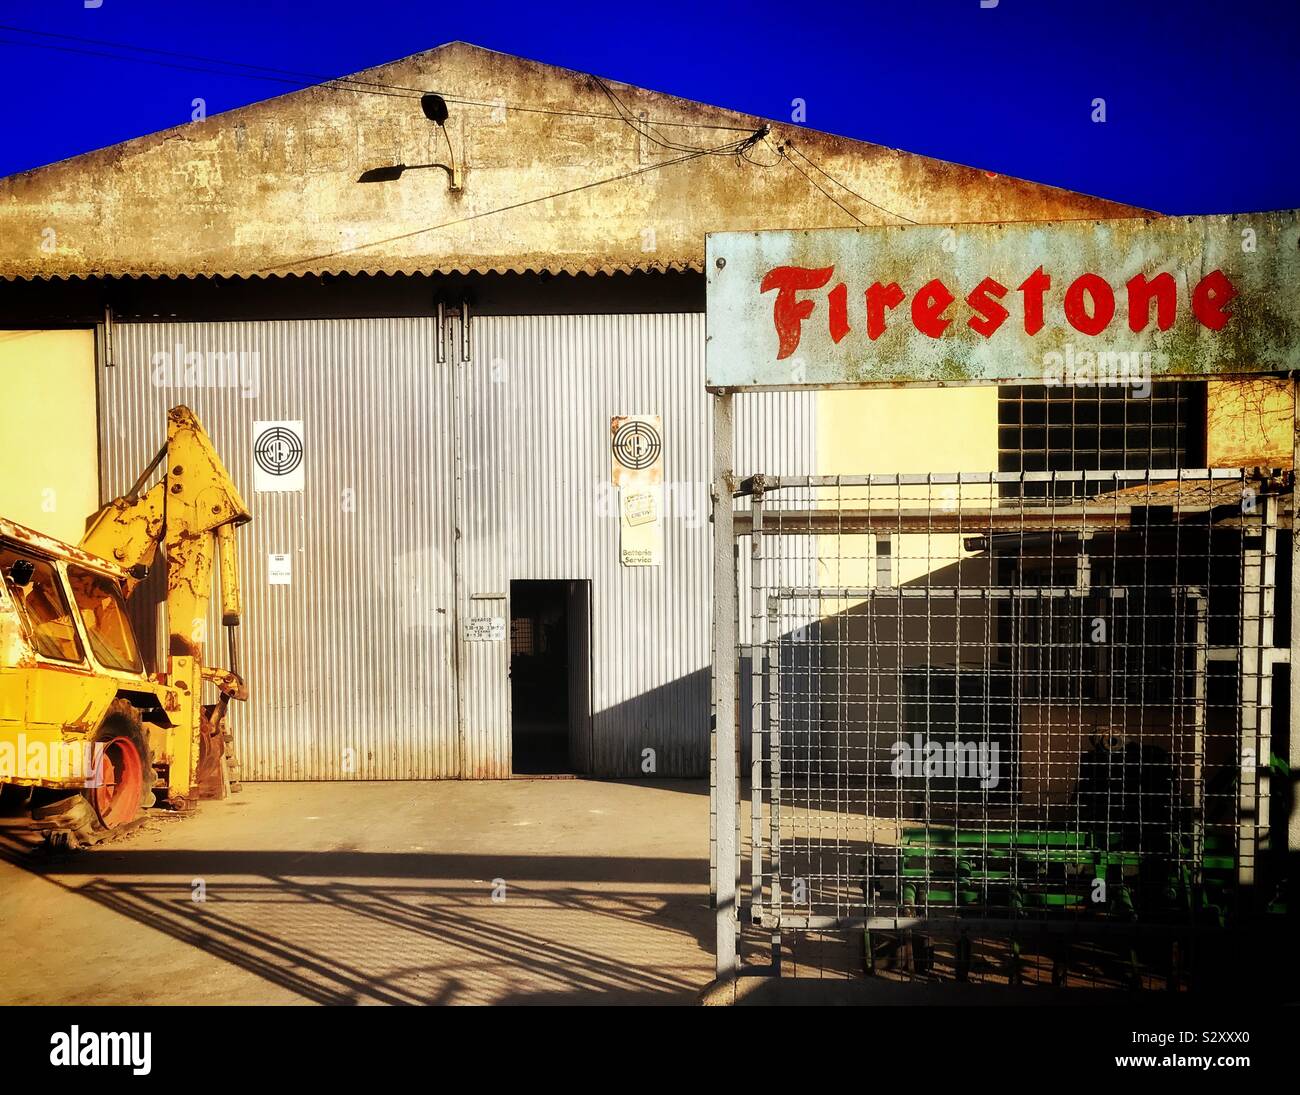 Firestone tyres and servicing centre Stock Photo